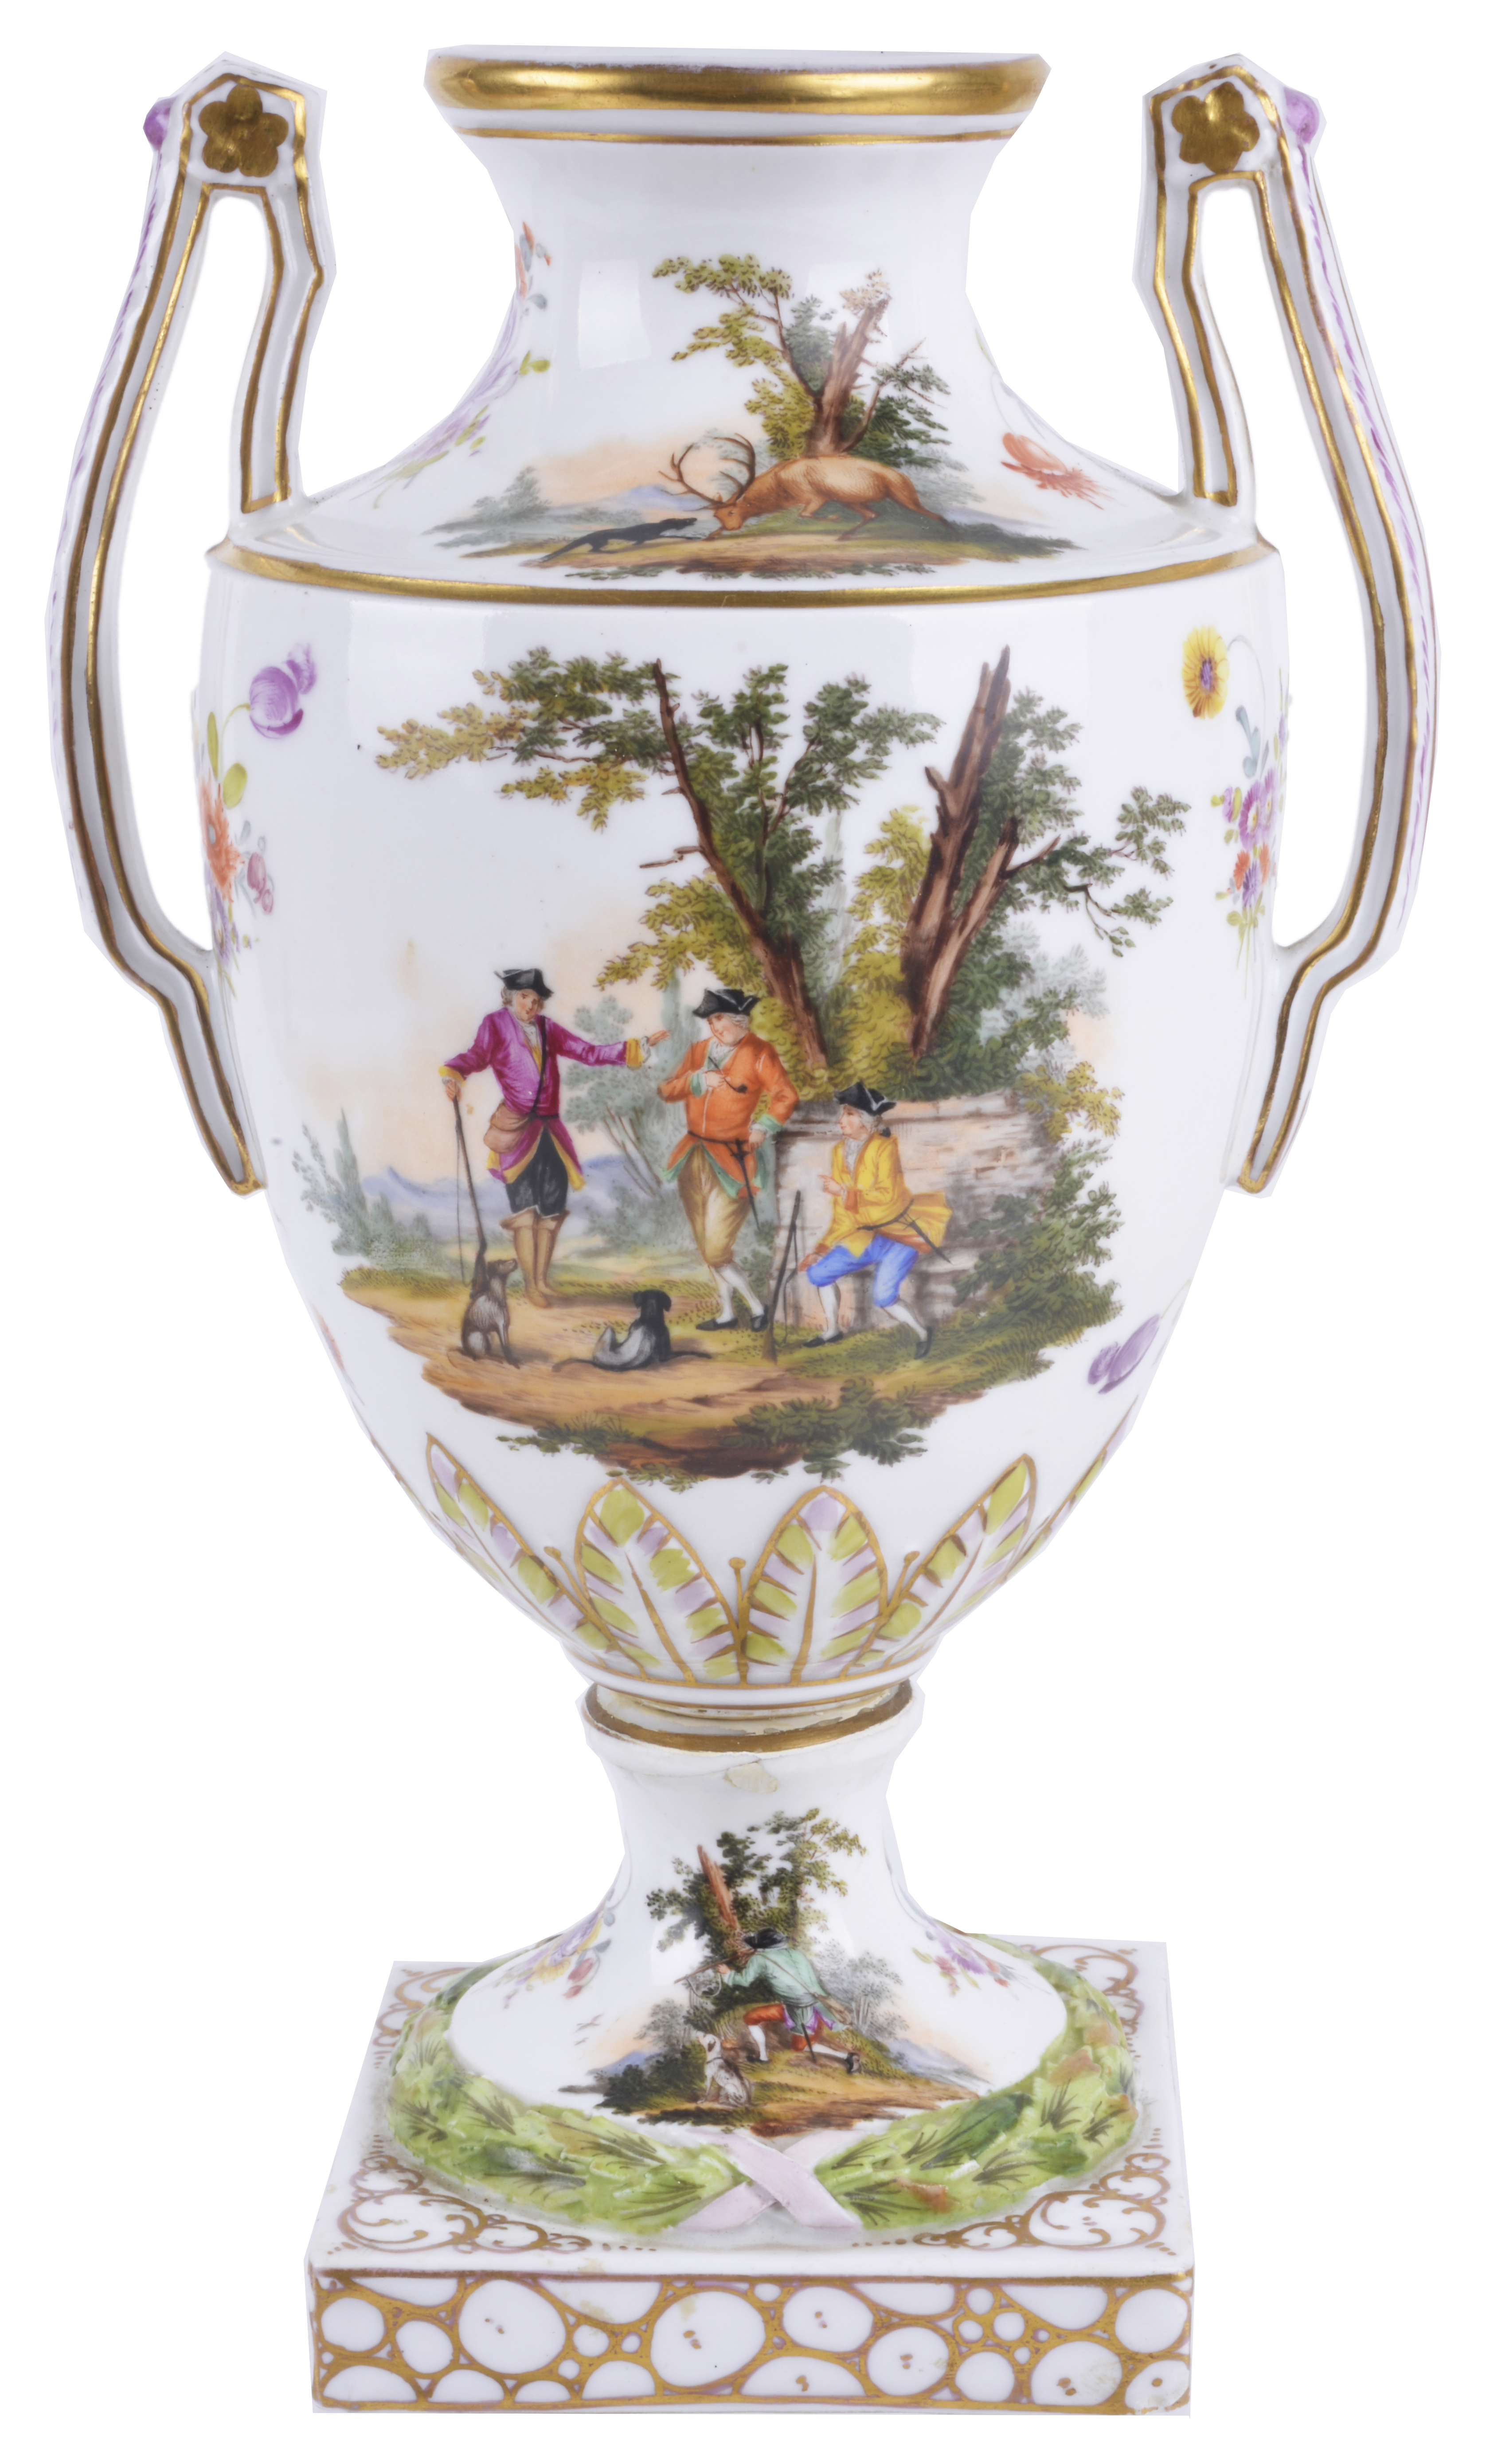 A late 19th century Continental twin handled porcelain urn